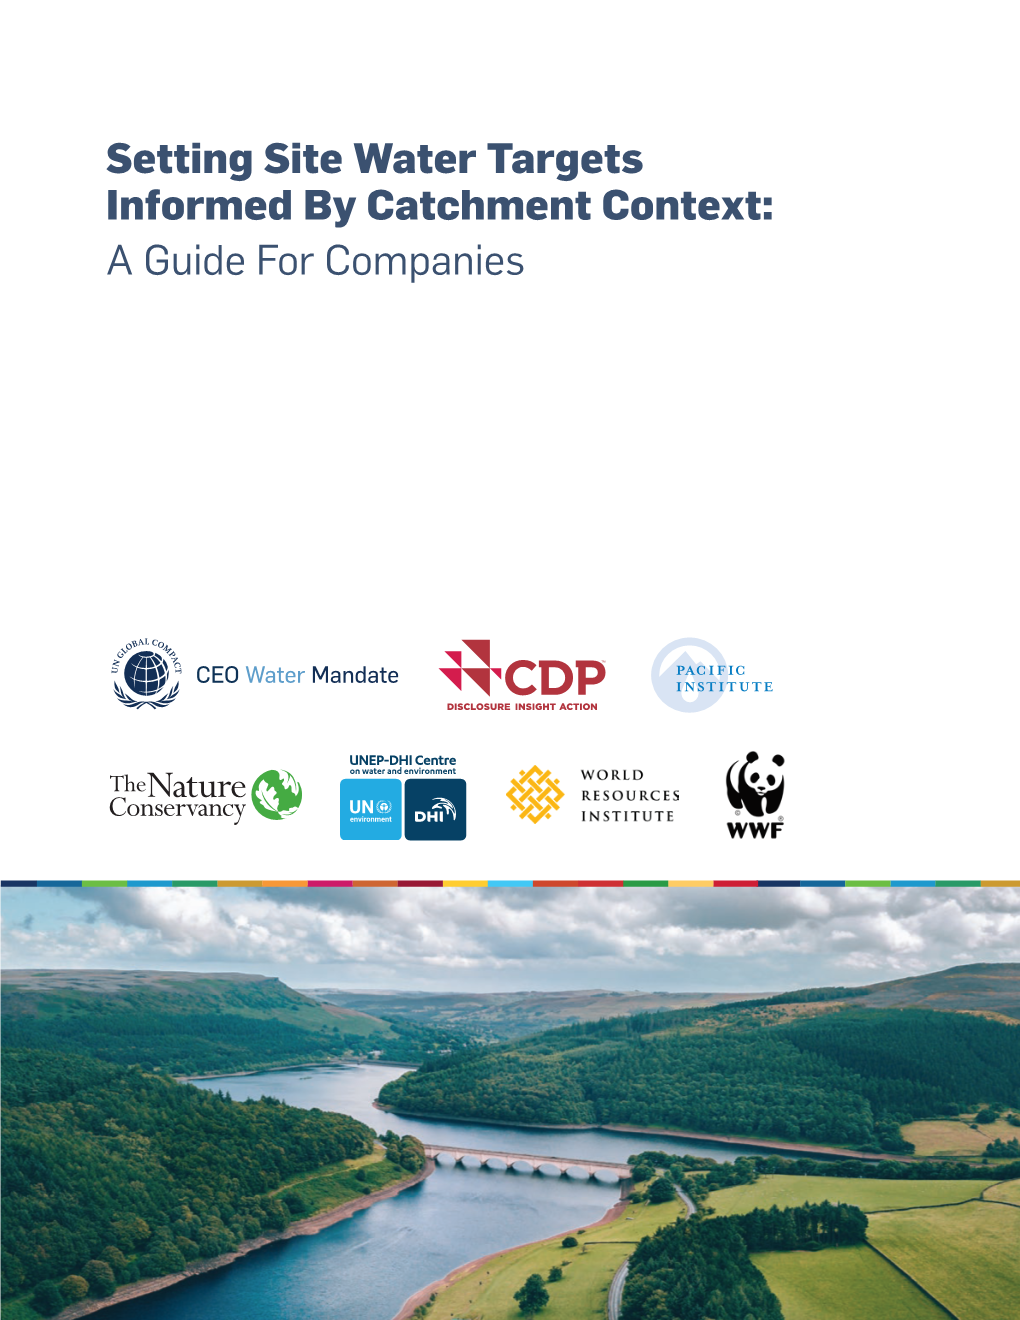 Setting Site Water Targets Informed by Catchment Context: a Guide for Companies